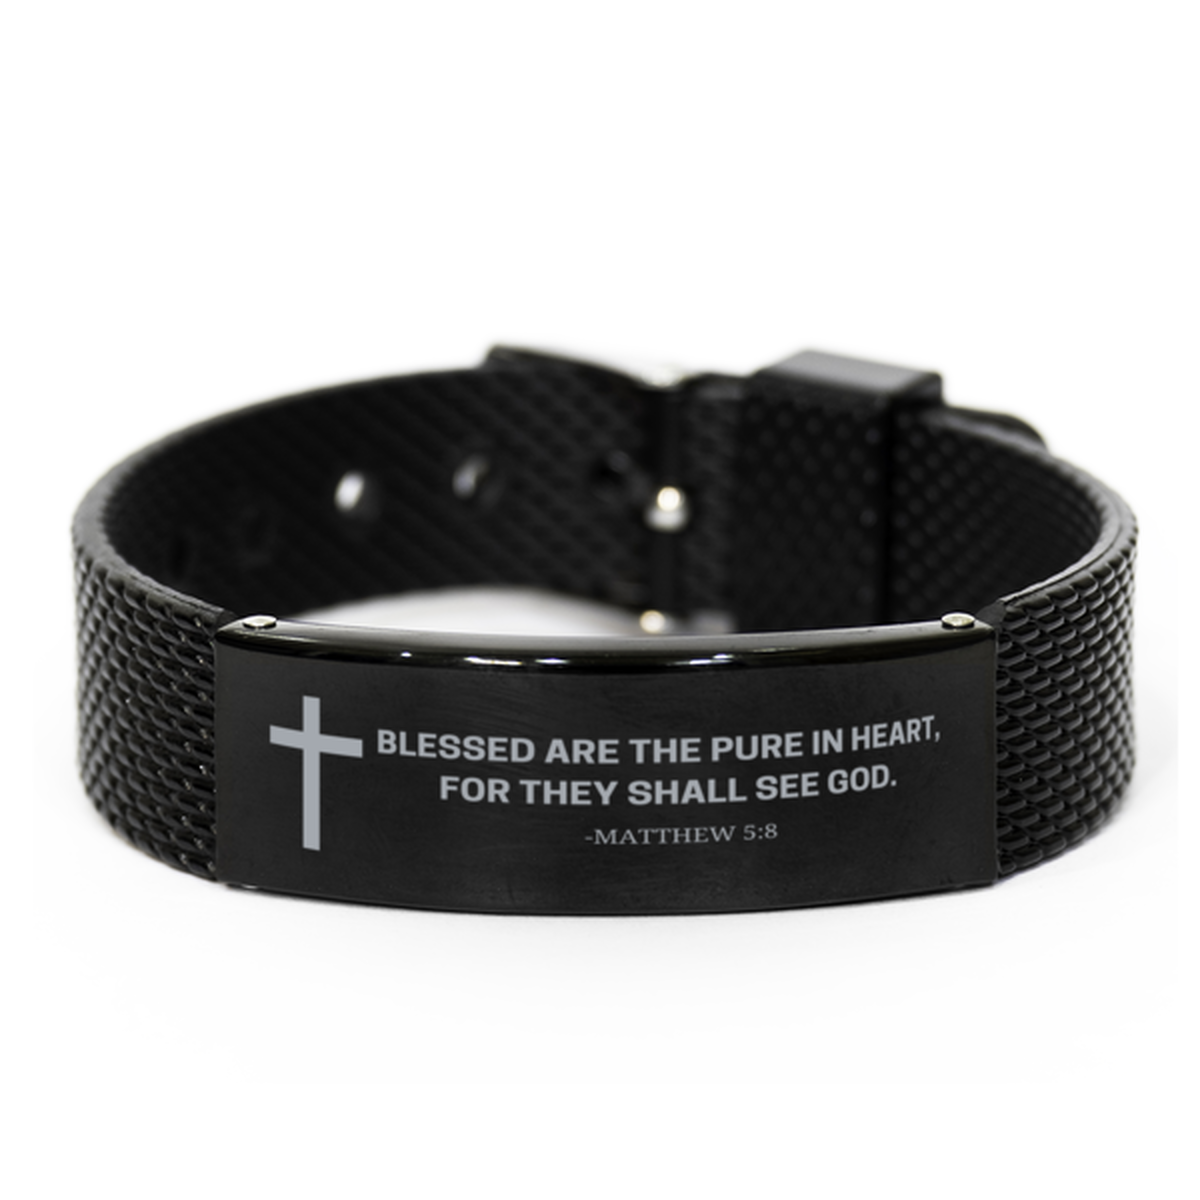 Baptism Gifts For Teenage Boys Girls, Christian Bible Verse Black Shark Mesh Bracelet, Blessed are the pure in heart, Catholic Confirmation Gifts for Son, Godson, Grandson, Nephew